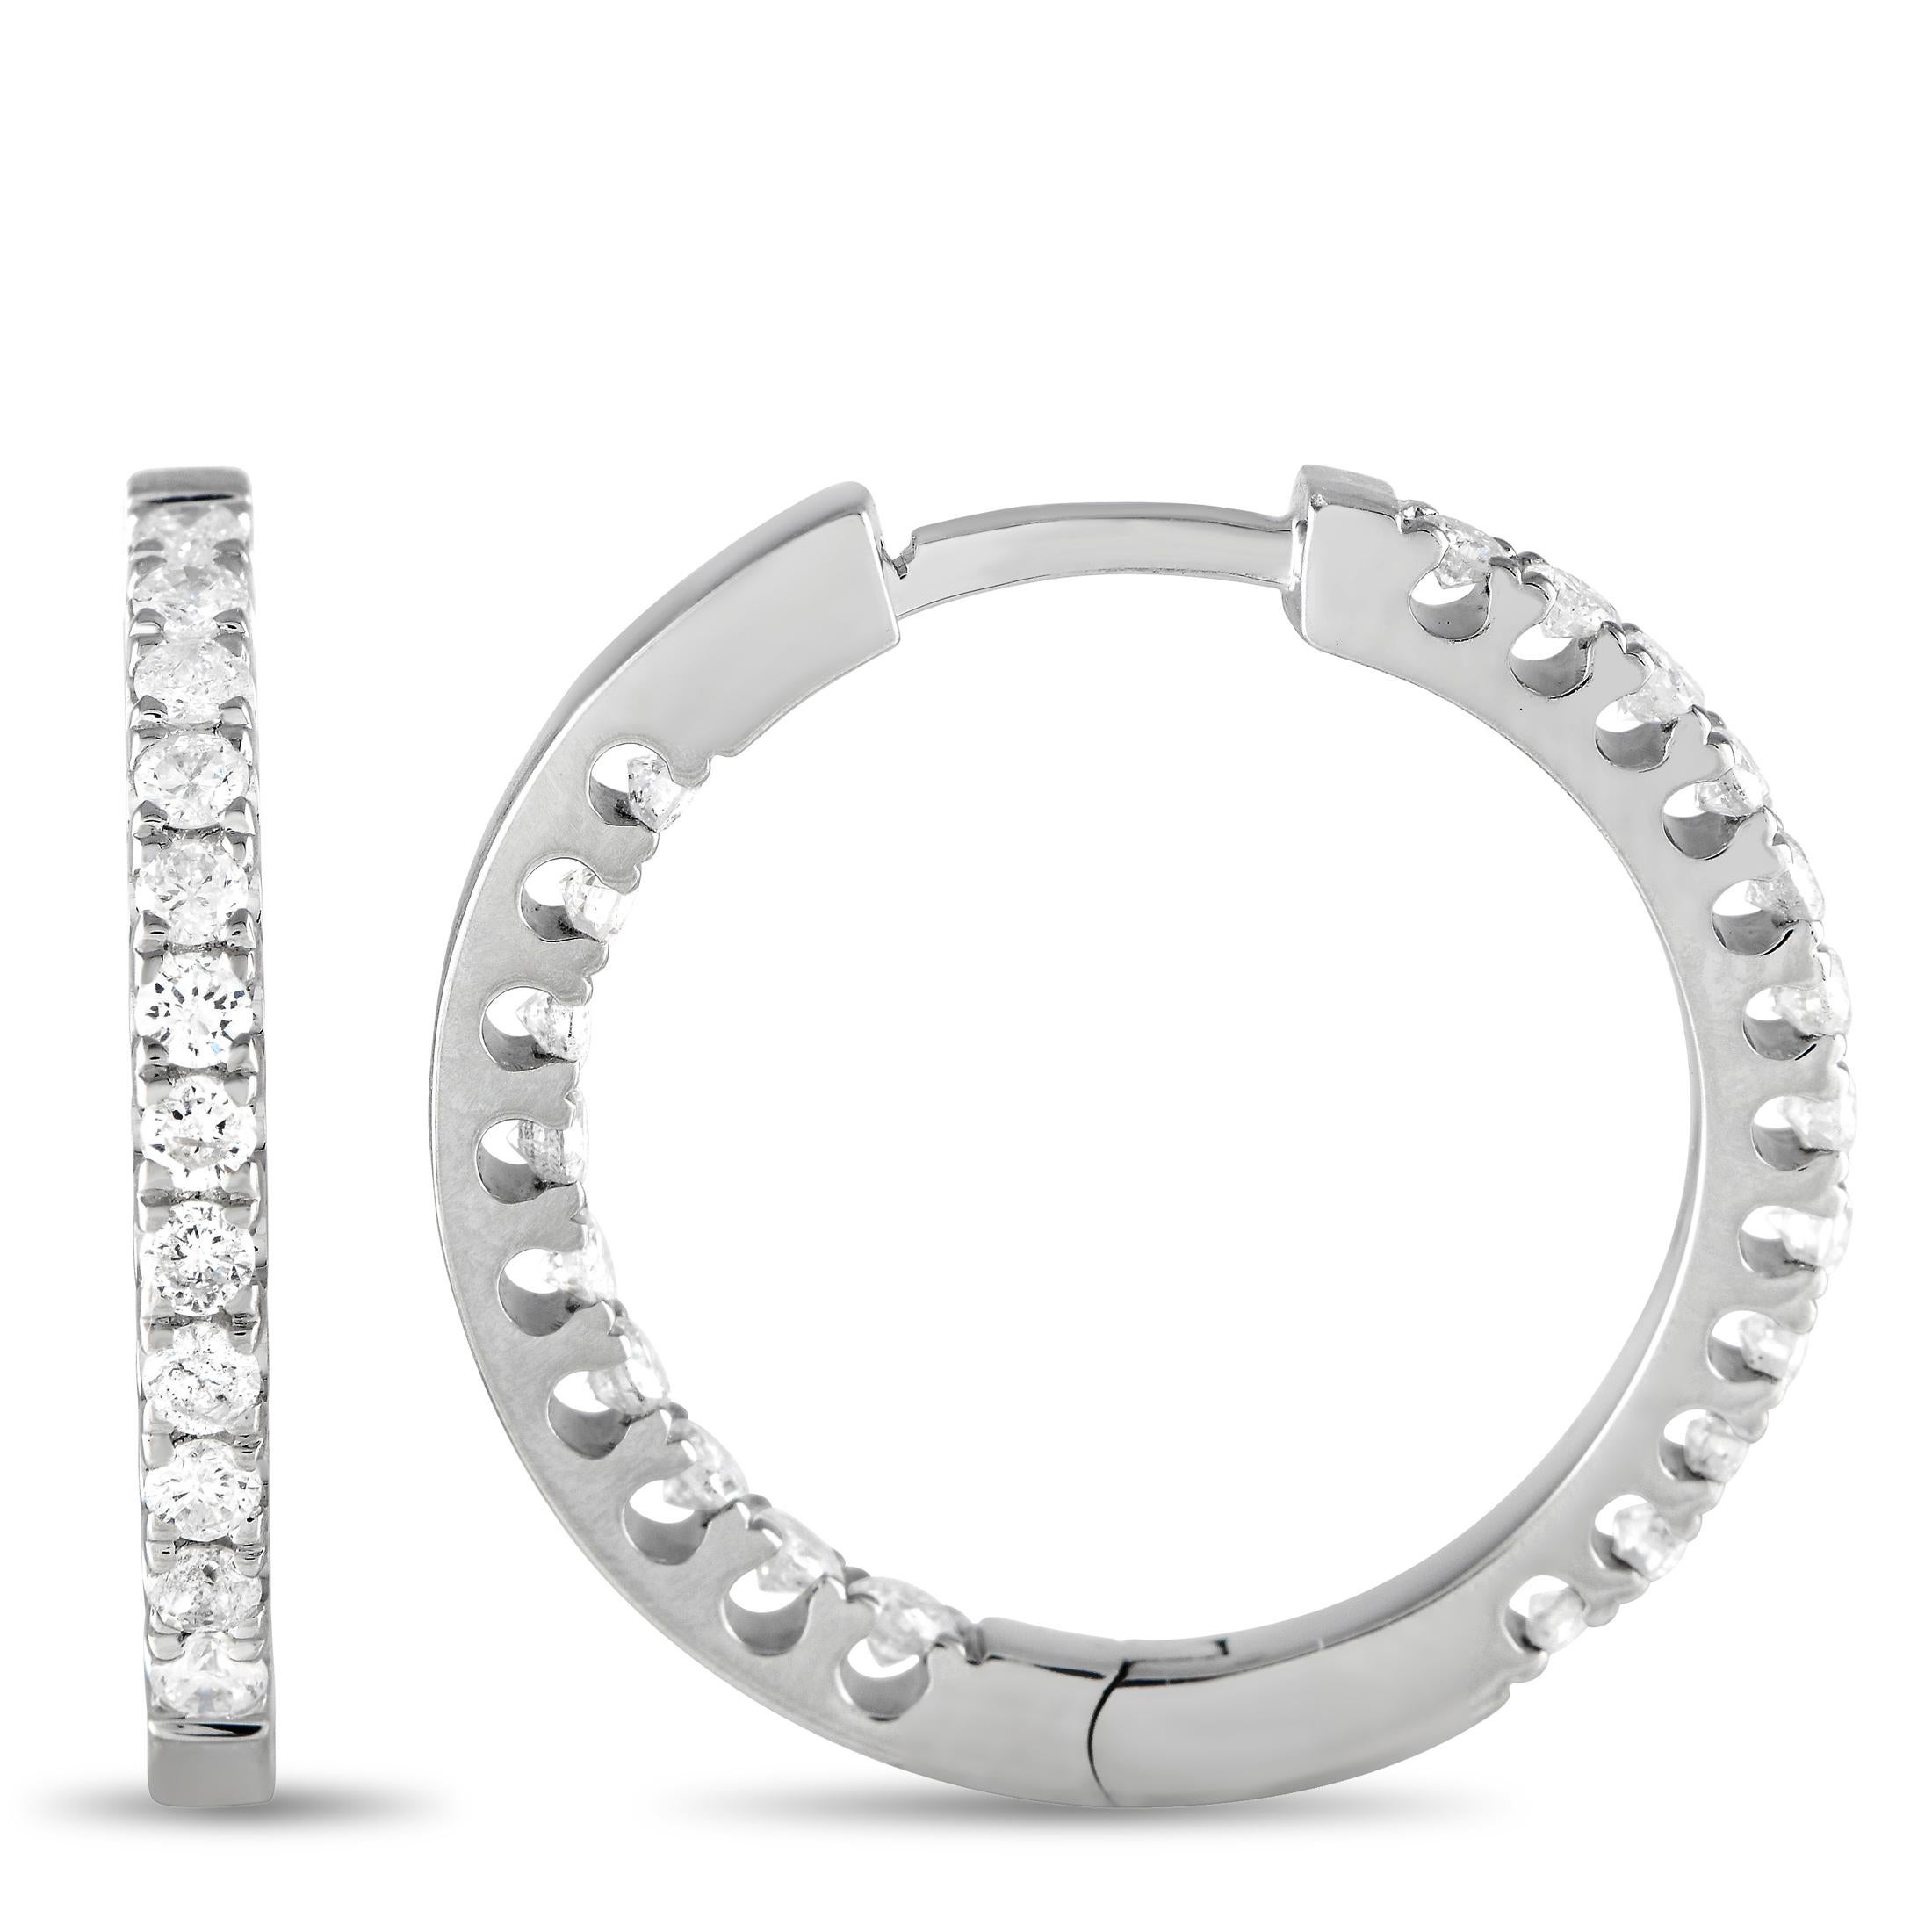 Add sparkle to any ensemble with these impeccably crafted 14K white gold inside-out hoop earrings. A shimmering 14K white gold setting perfectly showcases the round-cut diamonds, which together possess a total weight of 1.0 carats. Each one of these